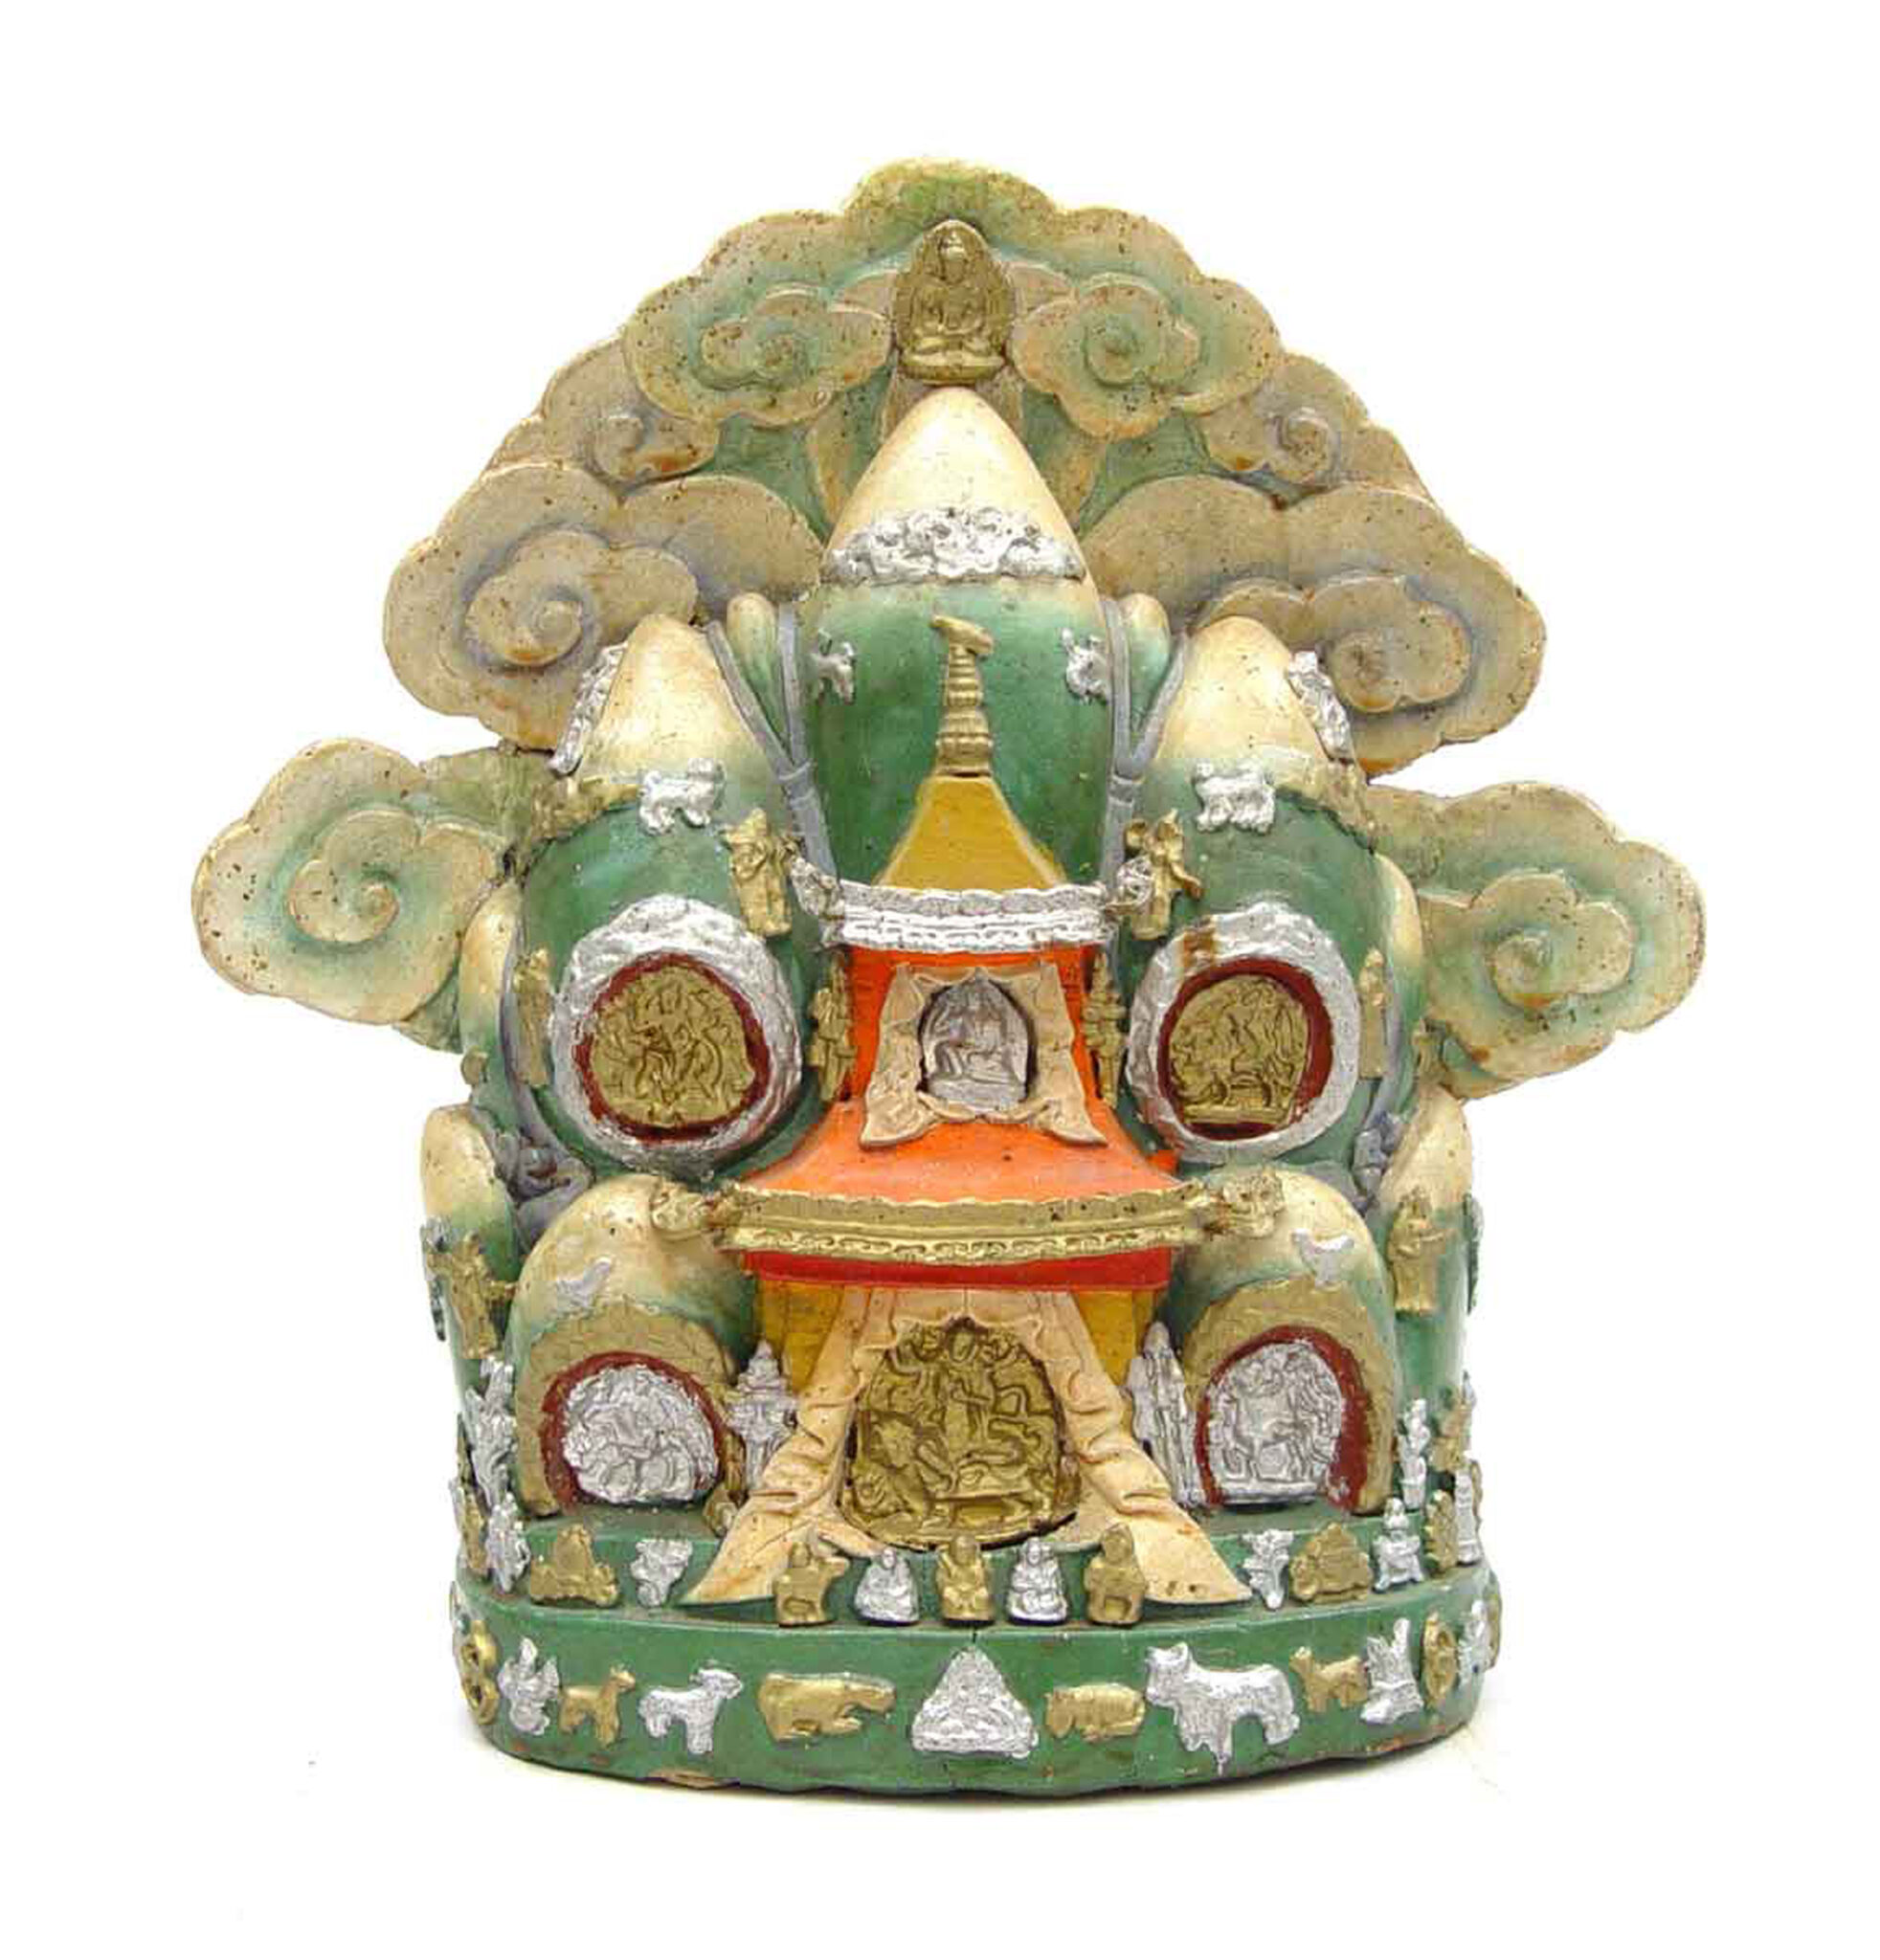 Polychrome religious sculpture in the form of two-story building surrounded by mountain peaks and stylized clouds